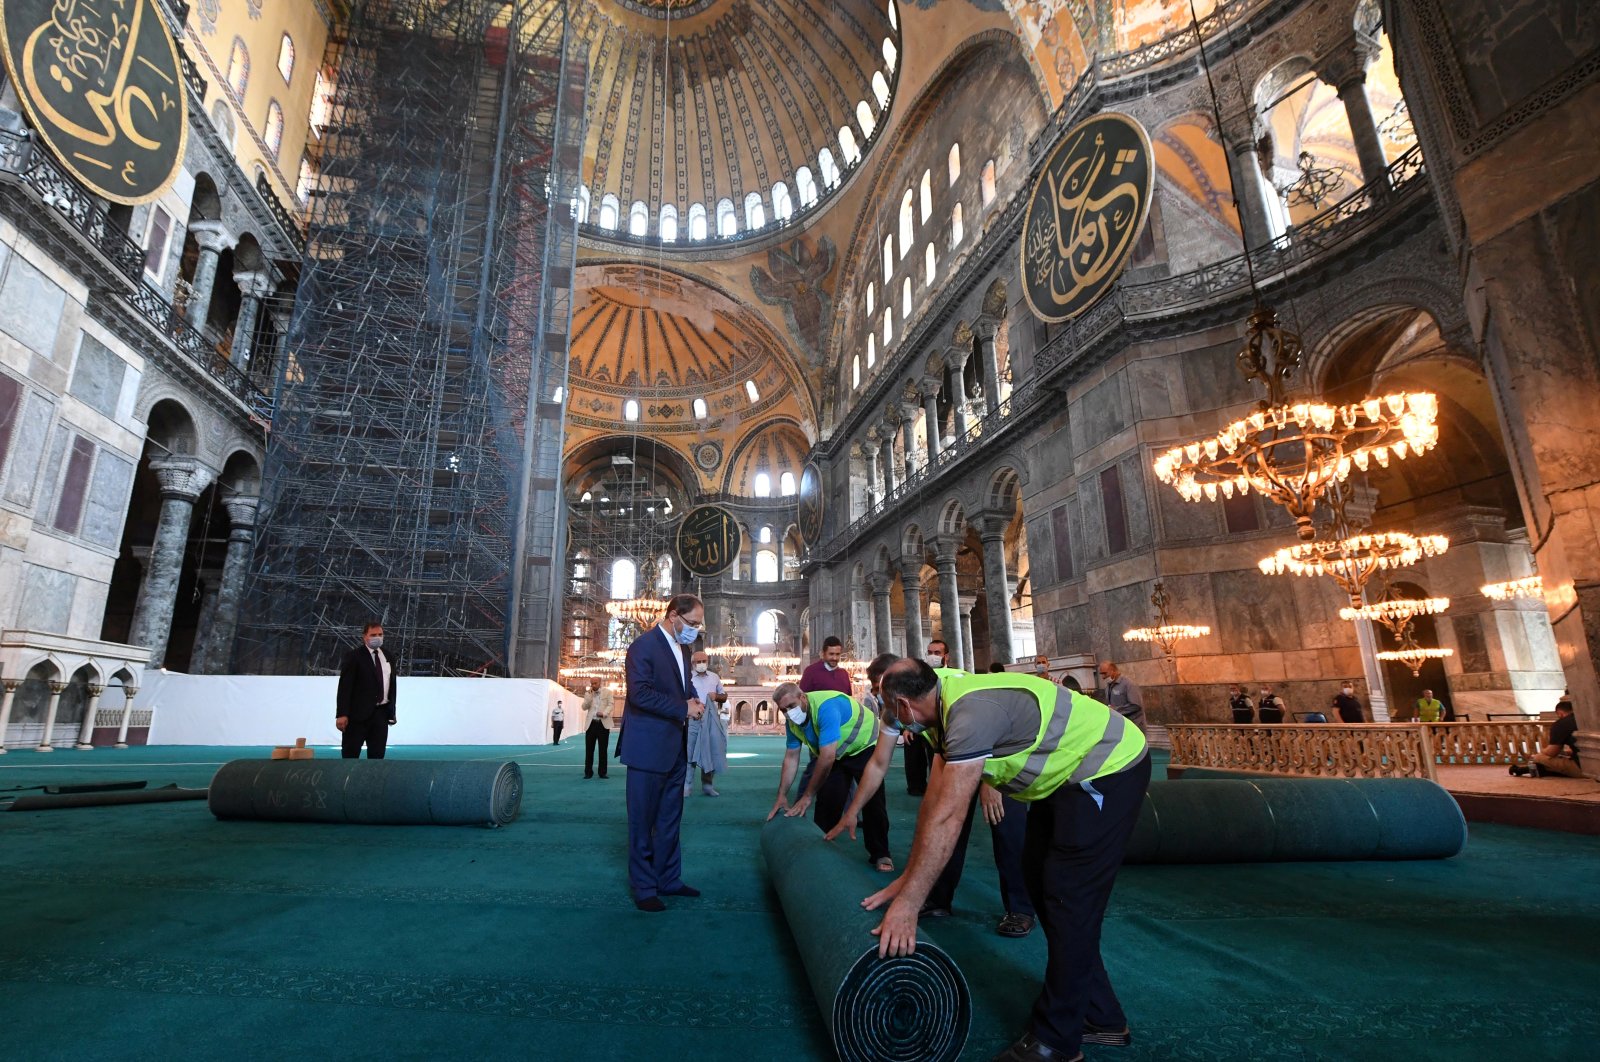 Head of Turkey's Religious Affairs Directorate (Diyanet) Ali Erbaş visits Hagia Sophia Mosque as workers lay carpets in Istanbul, July 22, 2020. (Reuters Photo)